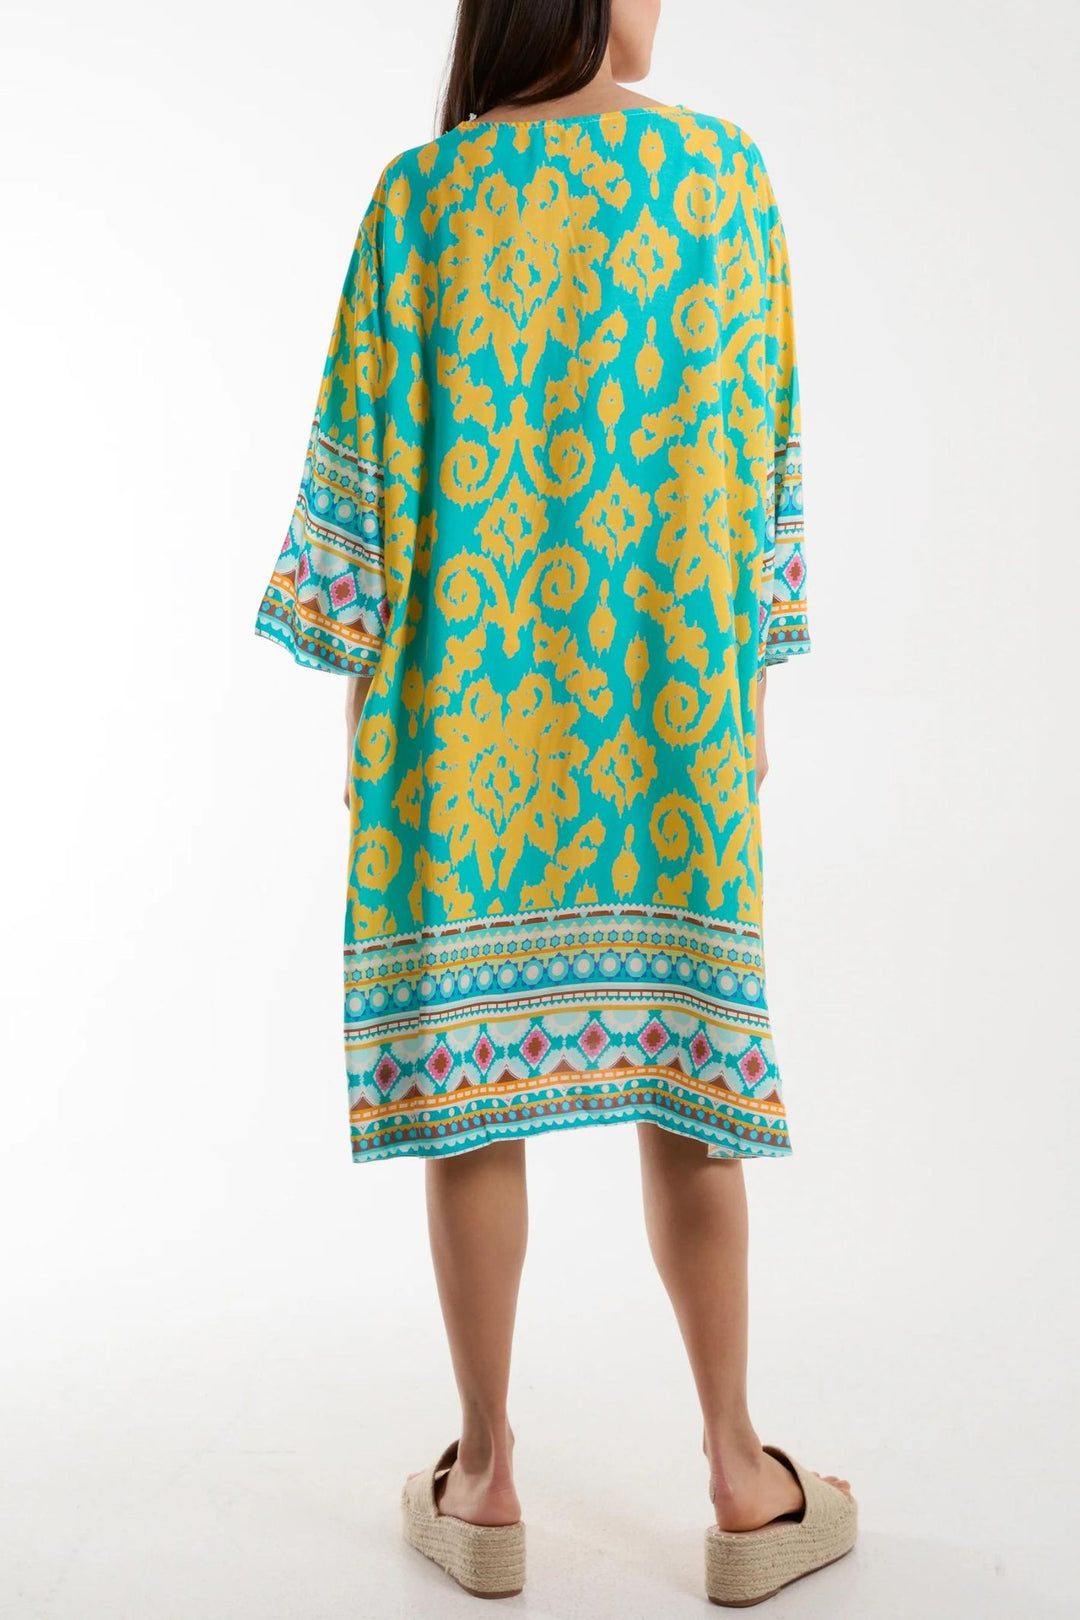 Turquoise & Sunshine Yellow A-line Tunic Cover Up